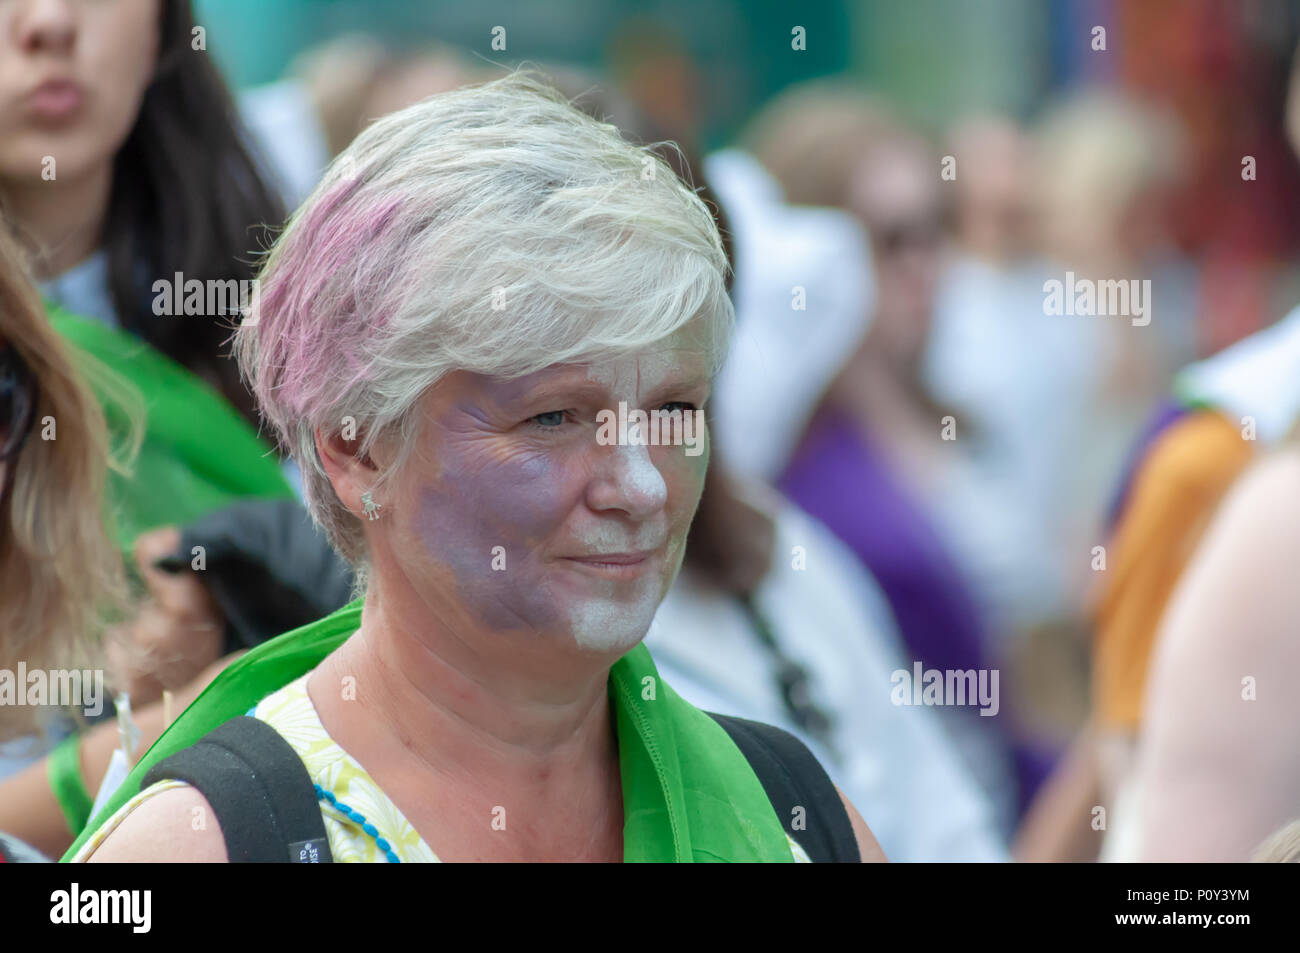 Edinburgh, Scotland, UK. 10th June, 2018. A woman with a painted face wearing a green scarf during the Edinburgh Processions Artwork march celebrating 100 years since British women won the right to vote. Thousands of women came together in the four capitals of the UK,  Belfast, Cardiff, Edinburgh and London. The Participants wore either a green, white or violet scarf and walked in stripes through the city streets to depict the colours of the suffragettes. Credit: Skully/Alamy Live News Stock Photo